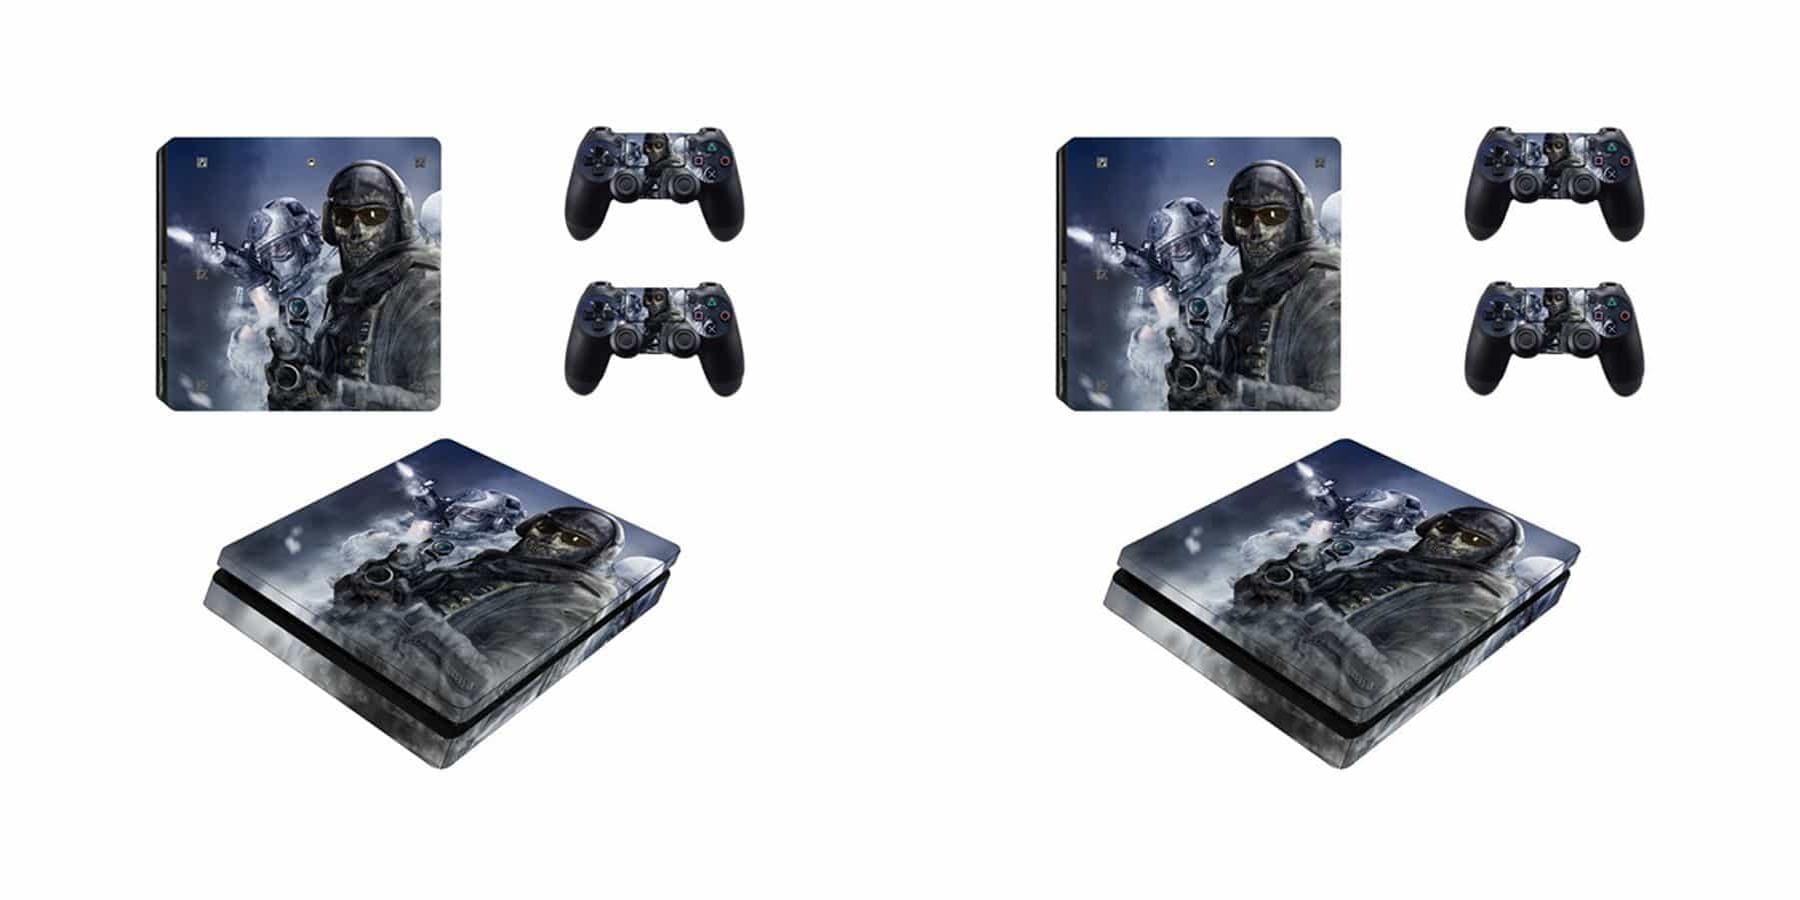 Set of 2 Call of Duty Sticker for PlayStation 4 Slim - ps4s3155